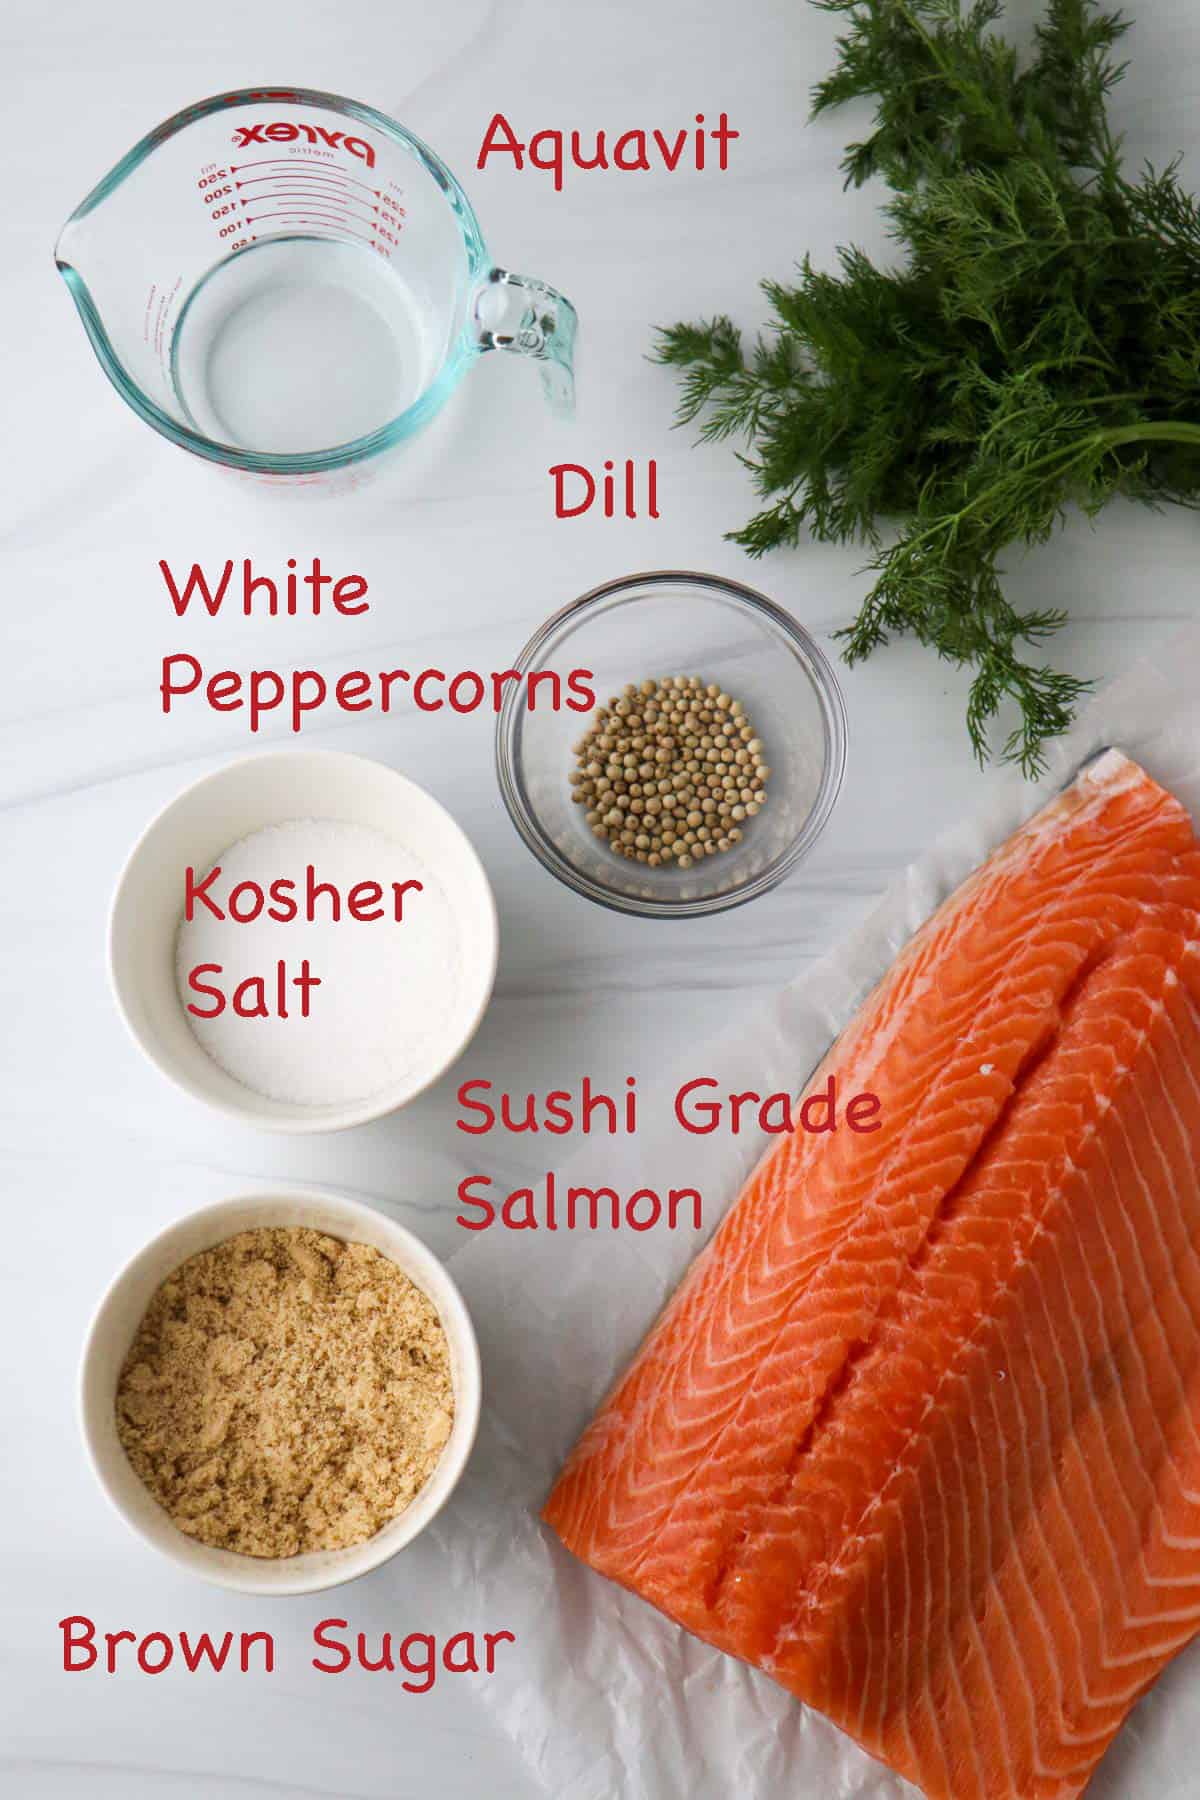 Labeled ingredients for Gravlax (Cured Salmon).